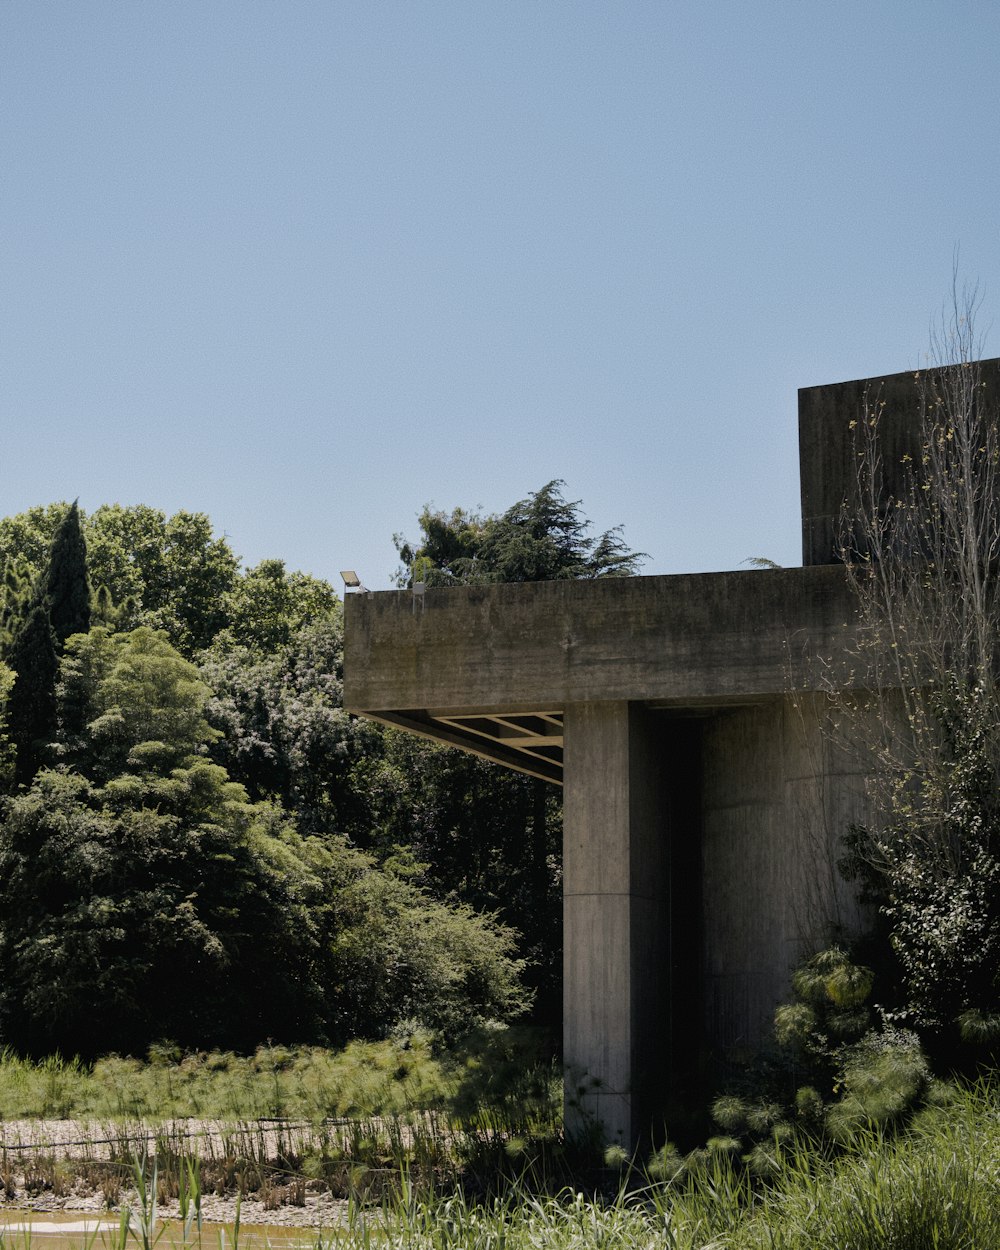 a concrete structure with trees in the background